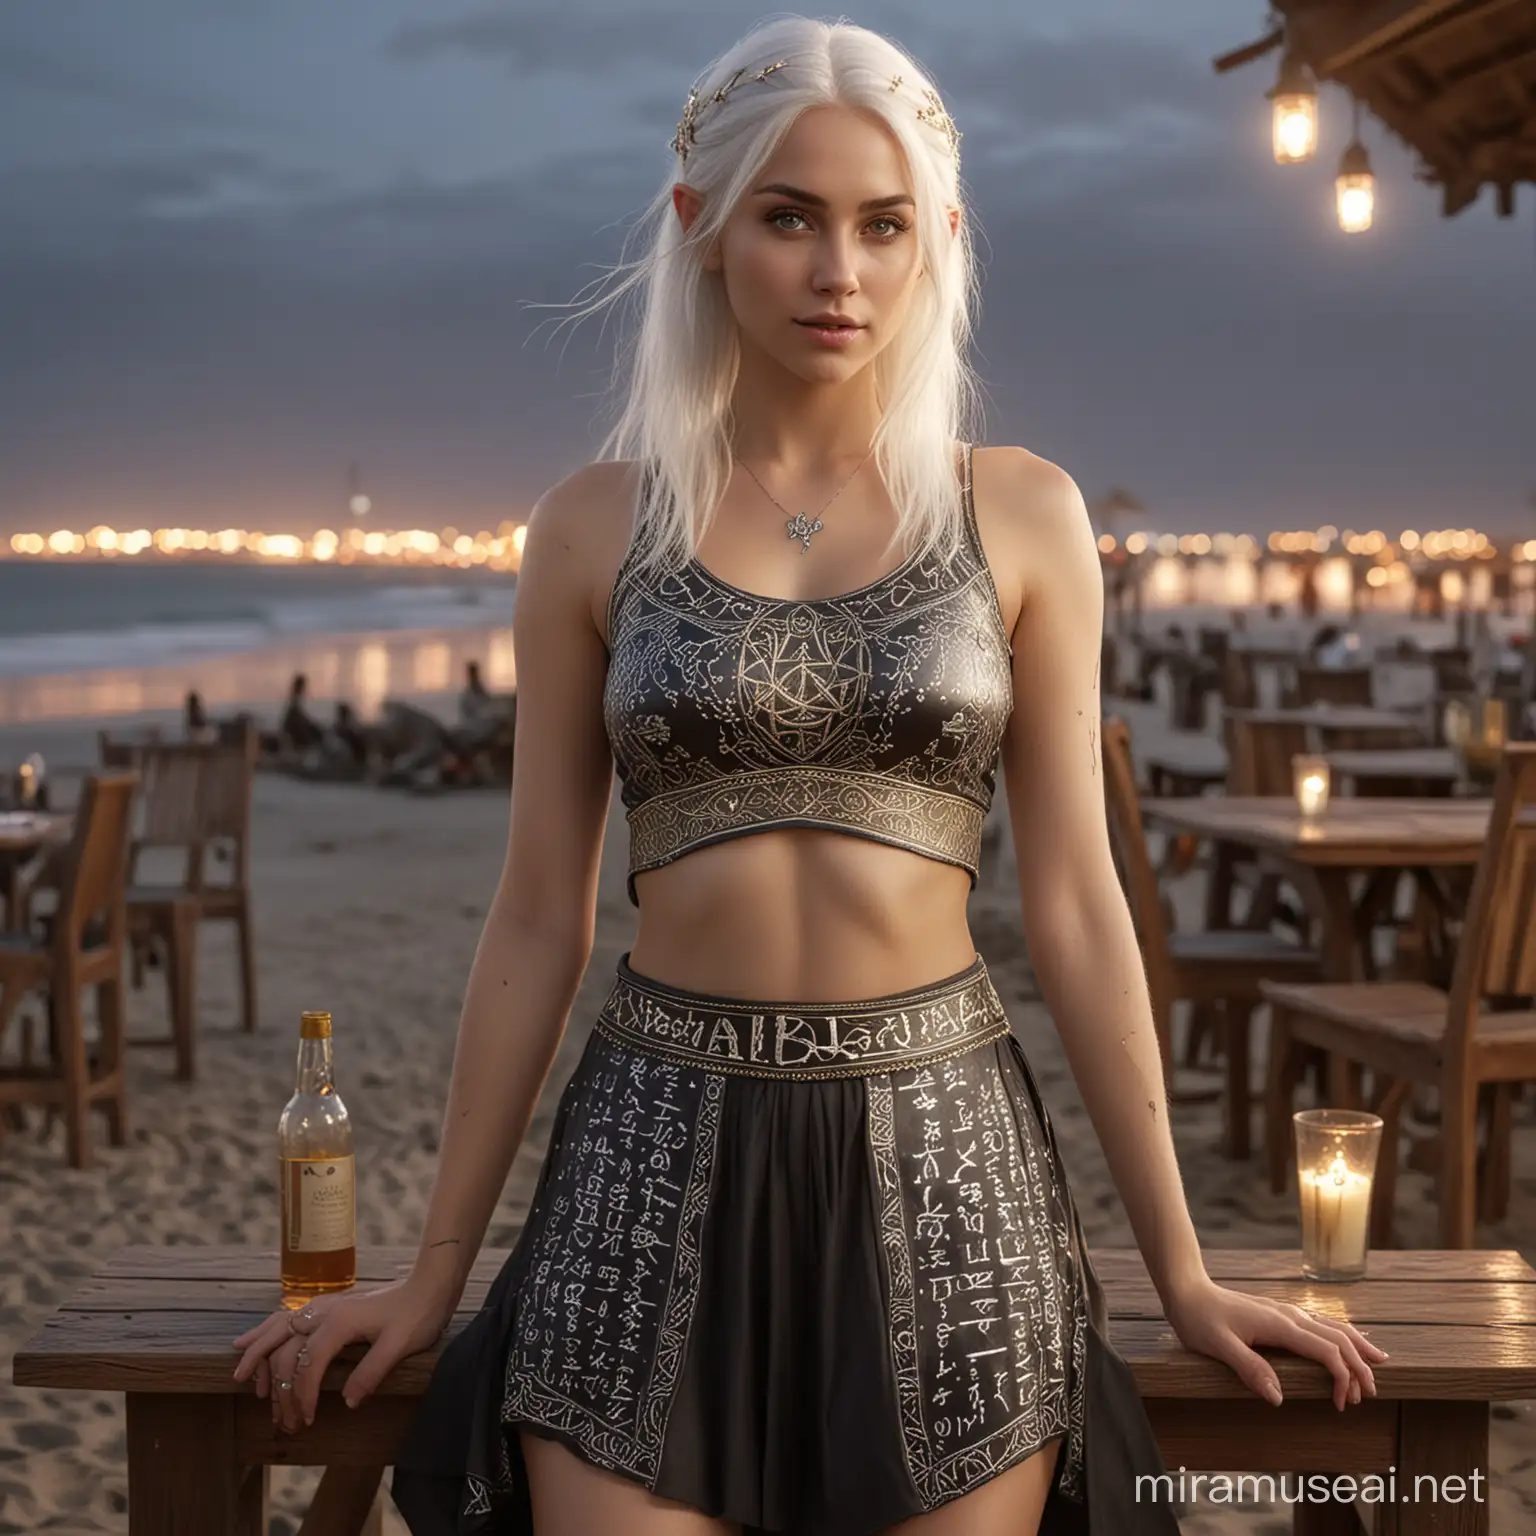 photographic quality extreme high details hyperrealistic full body image of a woman with white hair, her hair is decorated with silver. she has elvish writing in gold on arms and body. wearing a minimalistic sleeveless open front top and a loose skirt embroided with colourful elven runes, sitting at a beach bar in the evening facing the camera